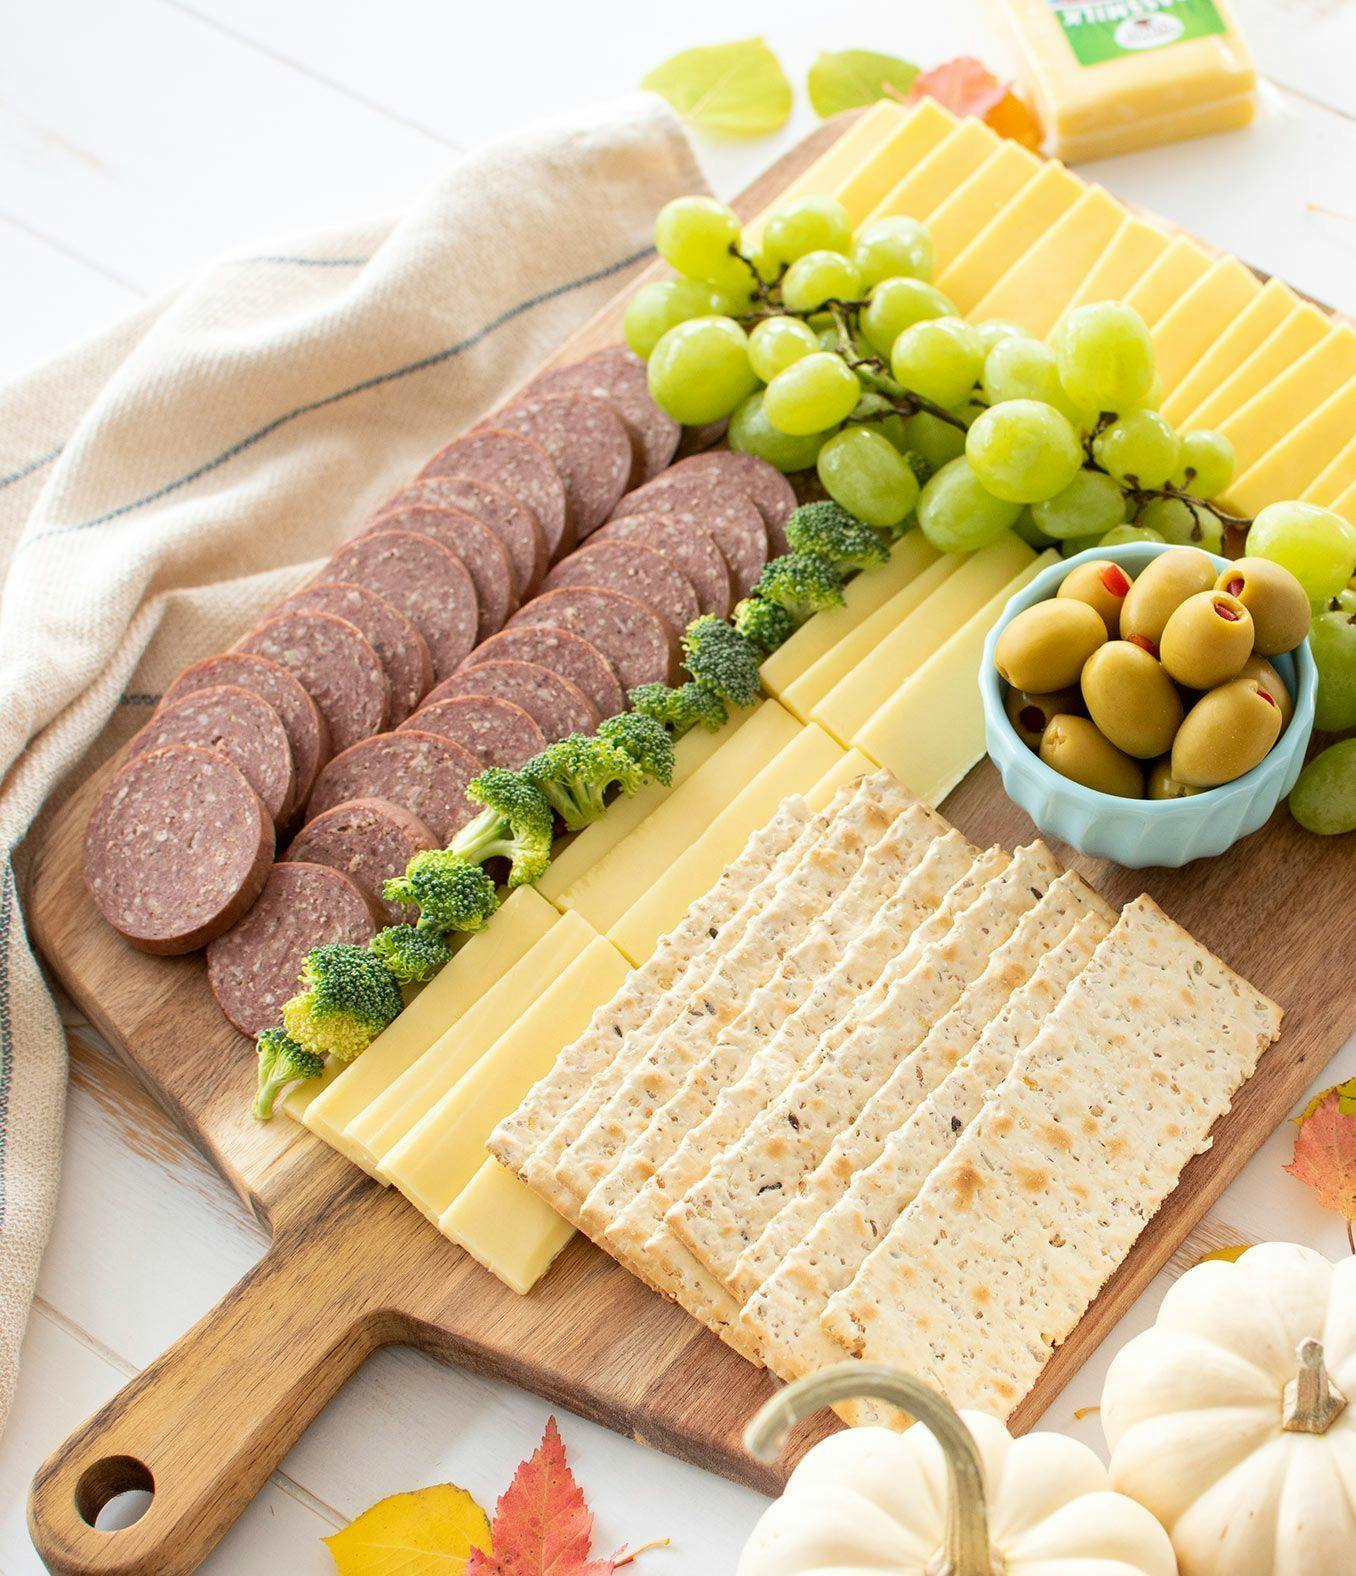 A charcuterie board with sausage, cheese, fruits, vegetables, and crackers.